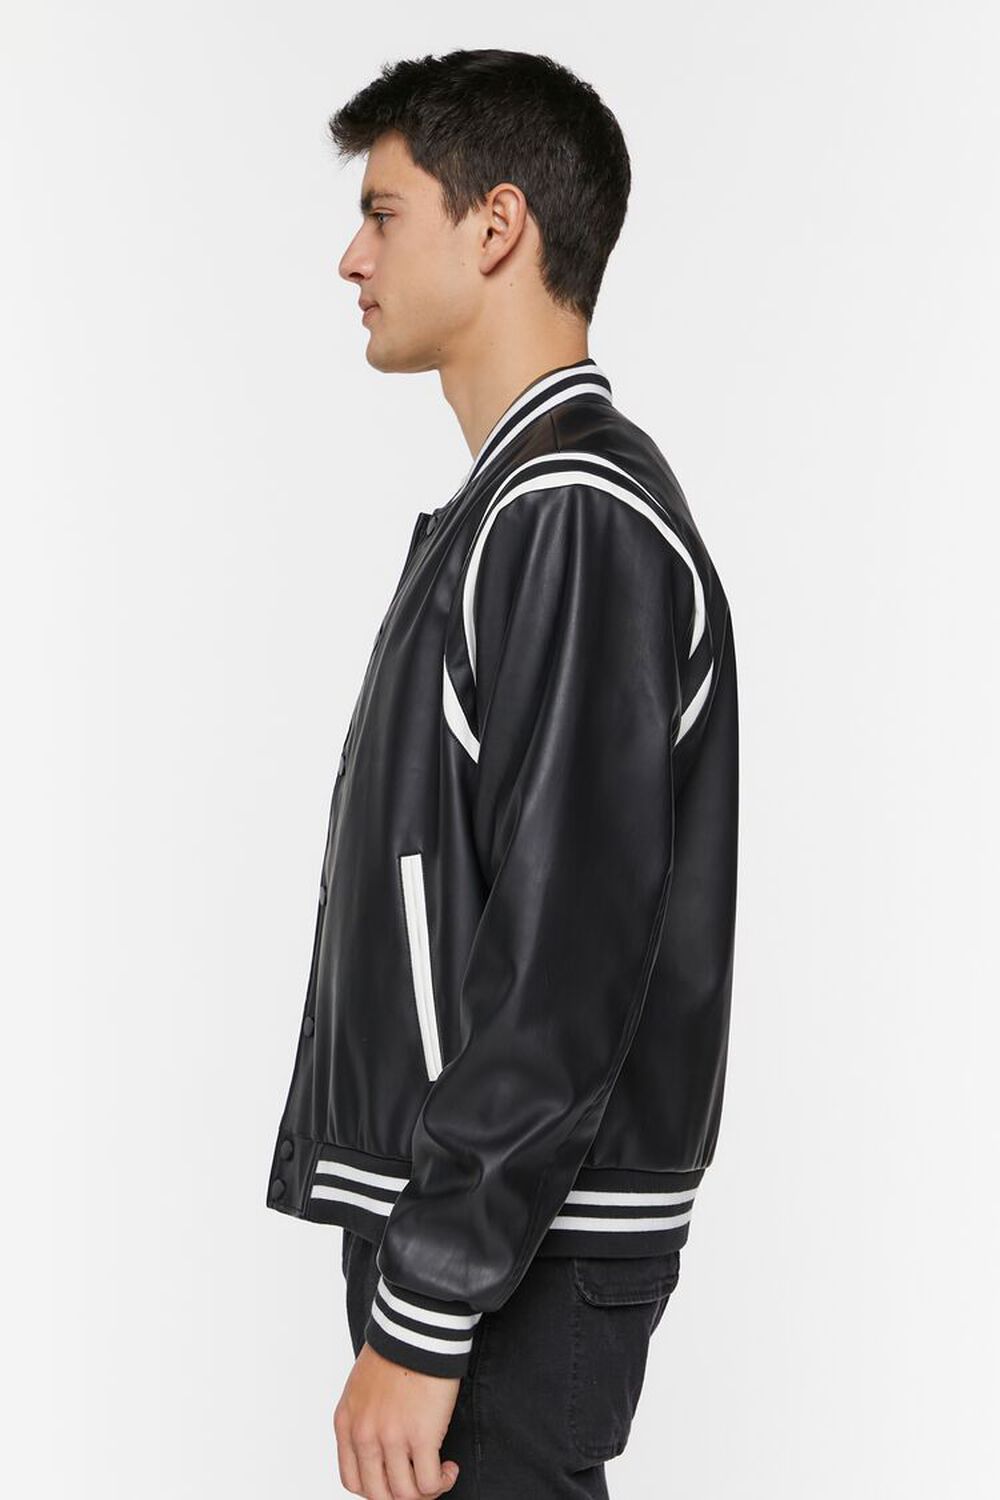 Mens Embroidered Varsity Jacket with Faux Leather Sleeves and